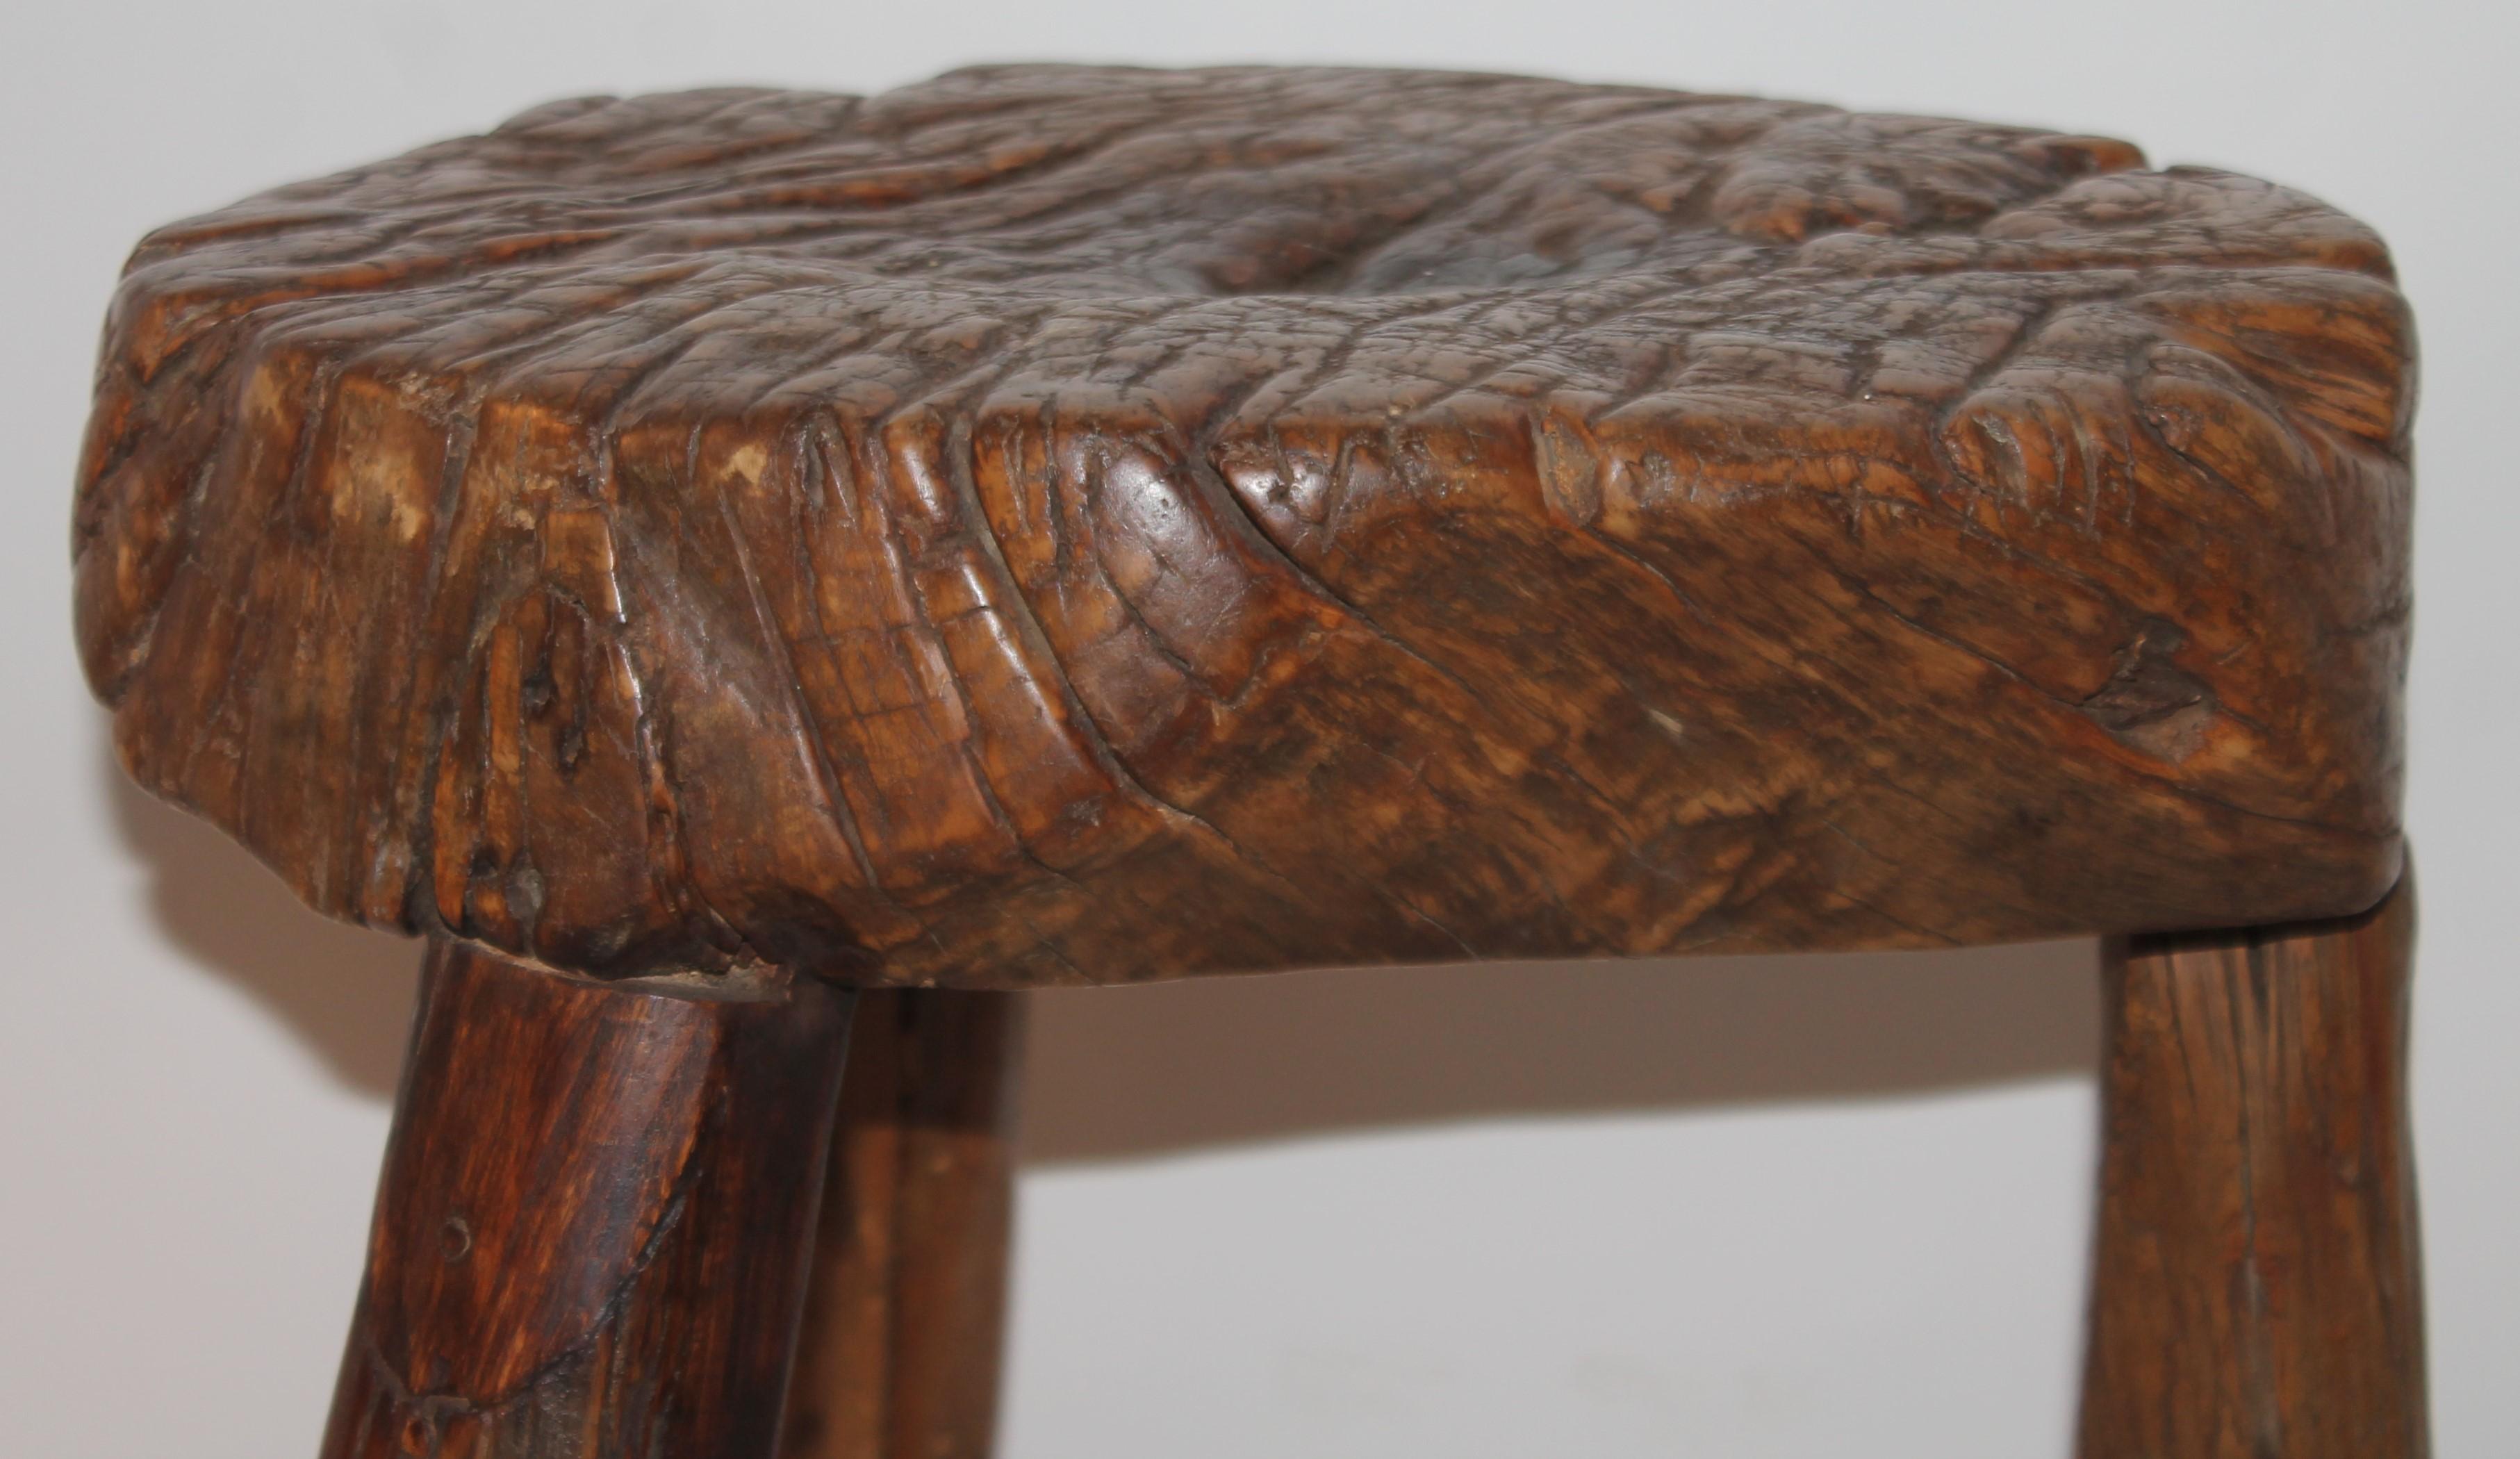 Hand-Crafted 18th C Plank Wood Stool